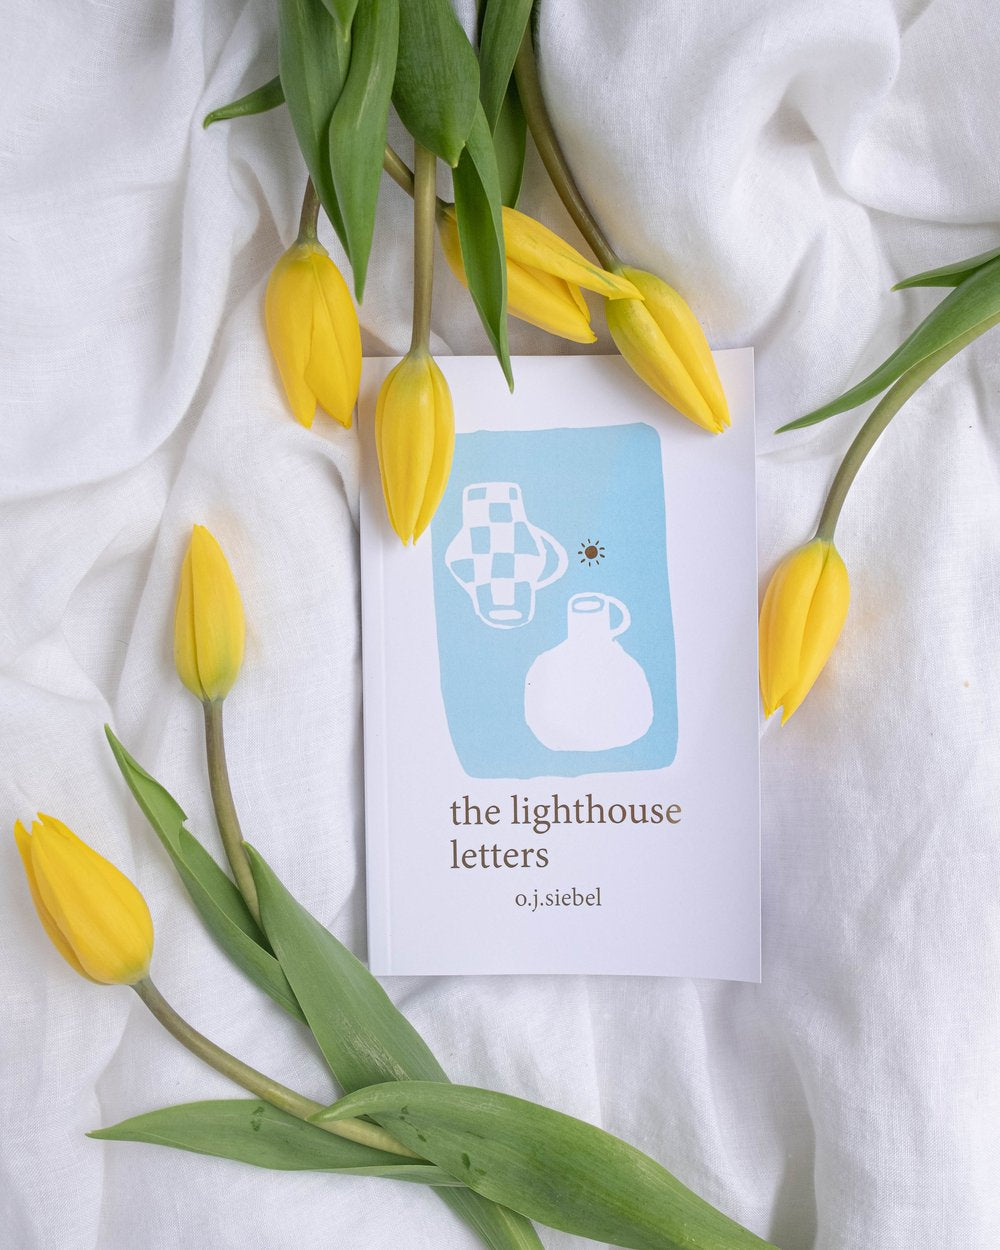 THE LIGHTHOUSE LETTERS